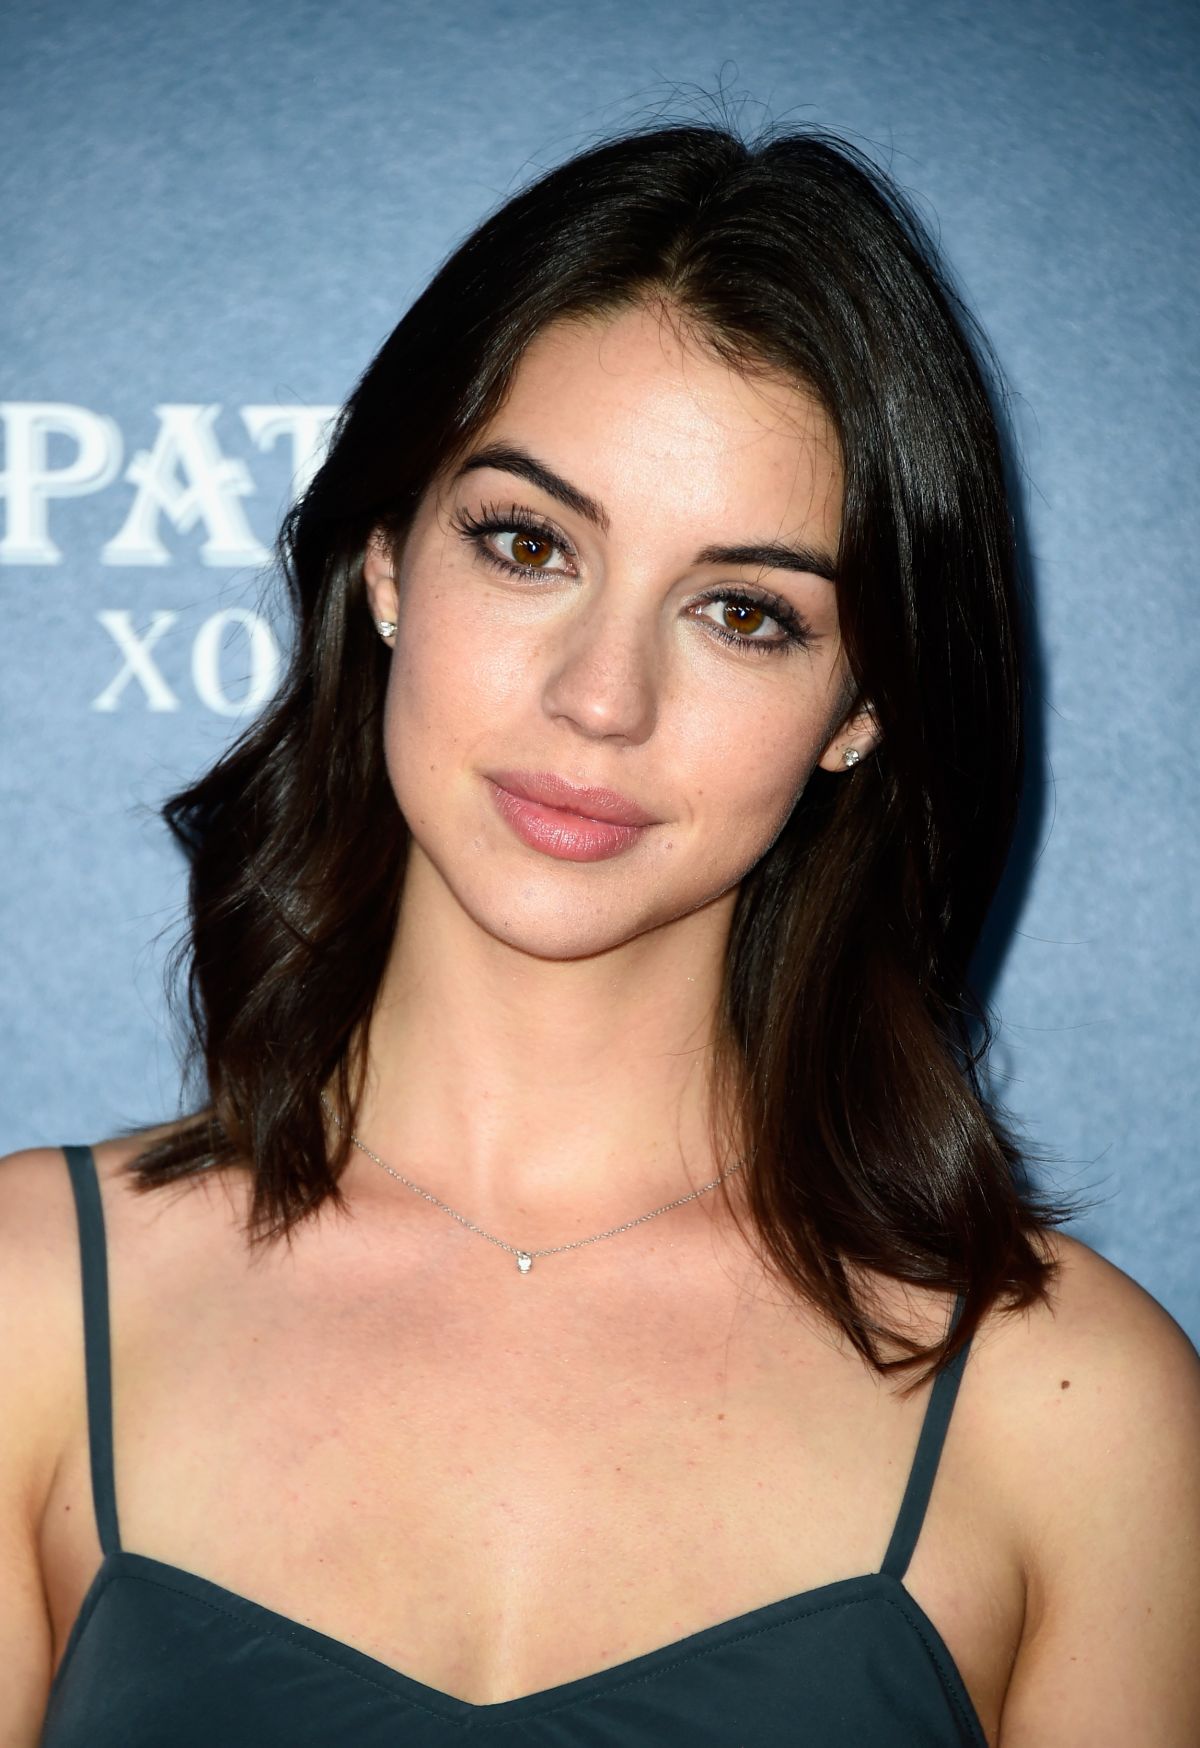 http://www.hawtcelebs.com/wp-content/uploads/2014/07/adelaide-kane-at-playboy-party-at-comic-con-in-san-diego_1.jpg